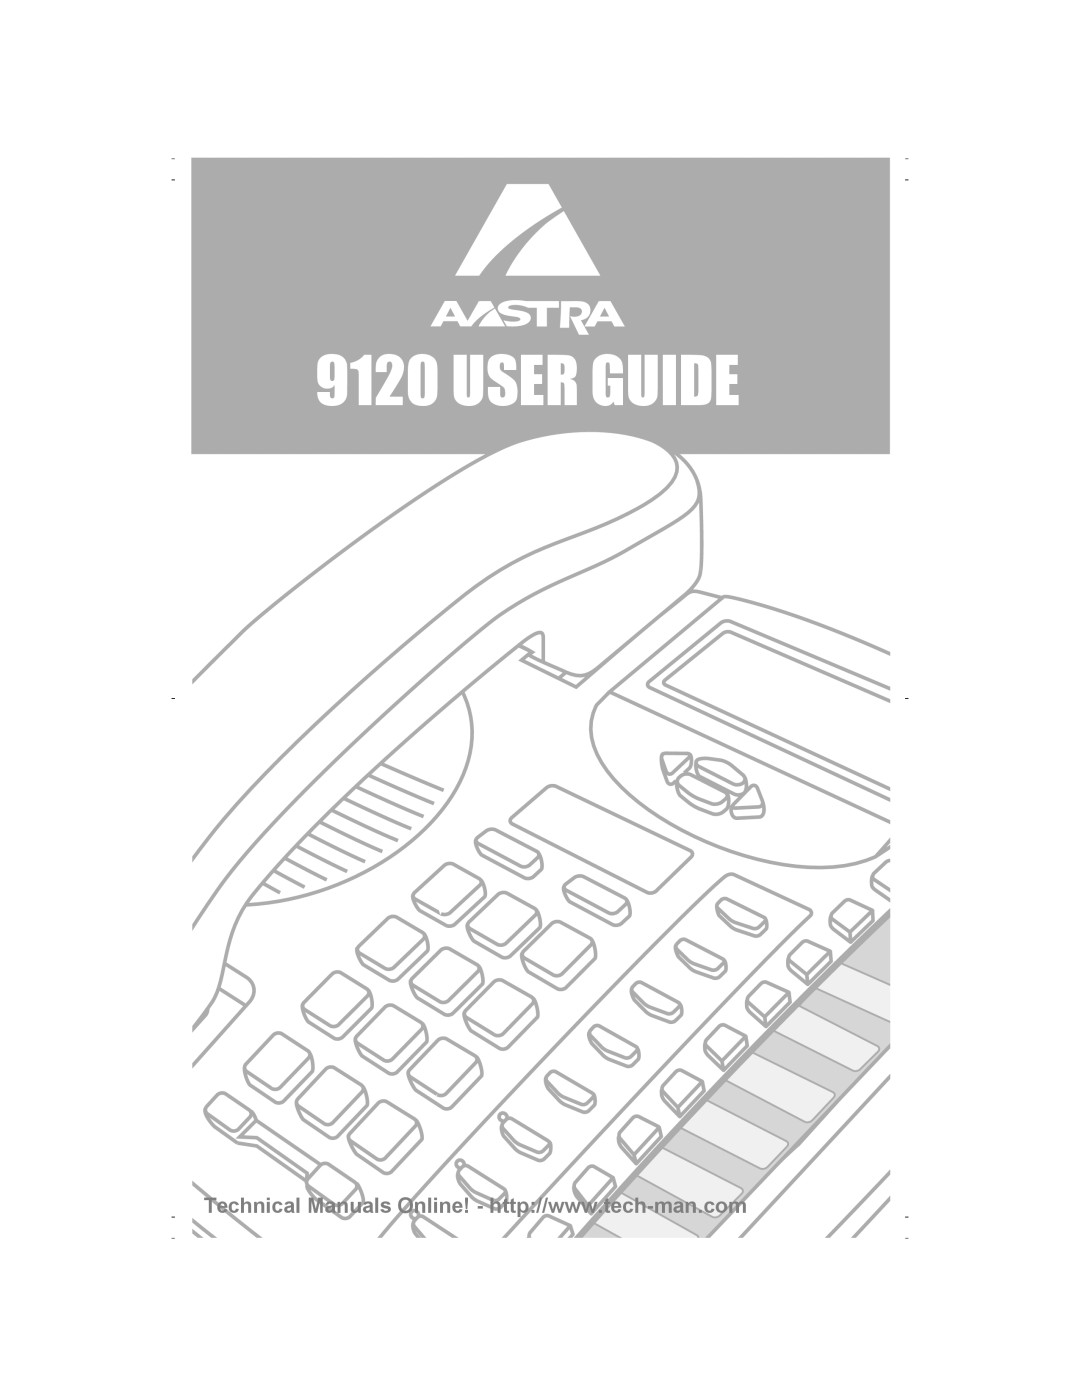 Aastra Telecom 9120 technical manual User Guide 